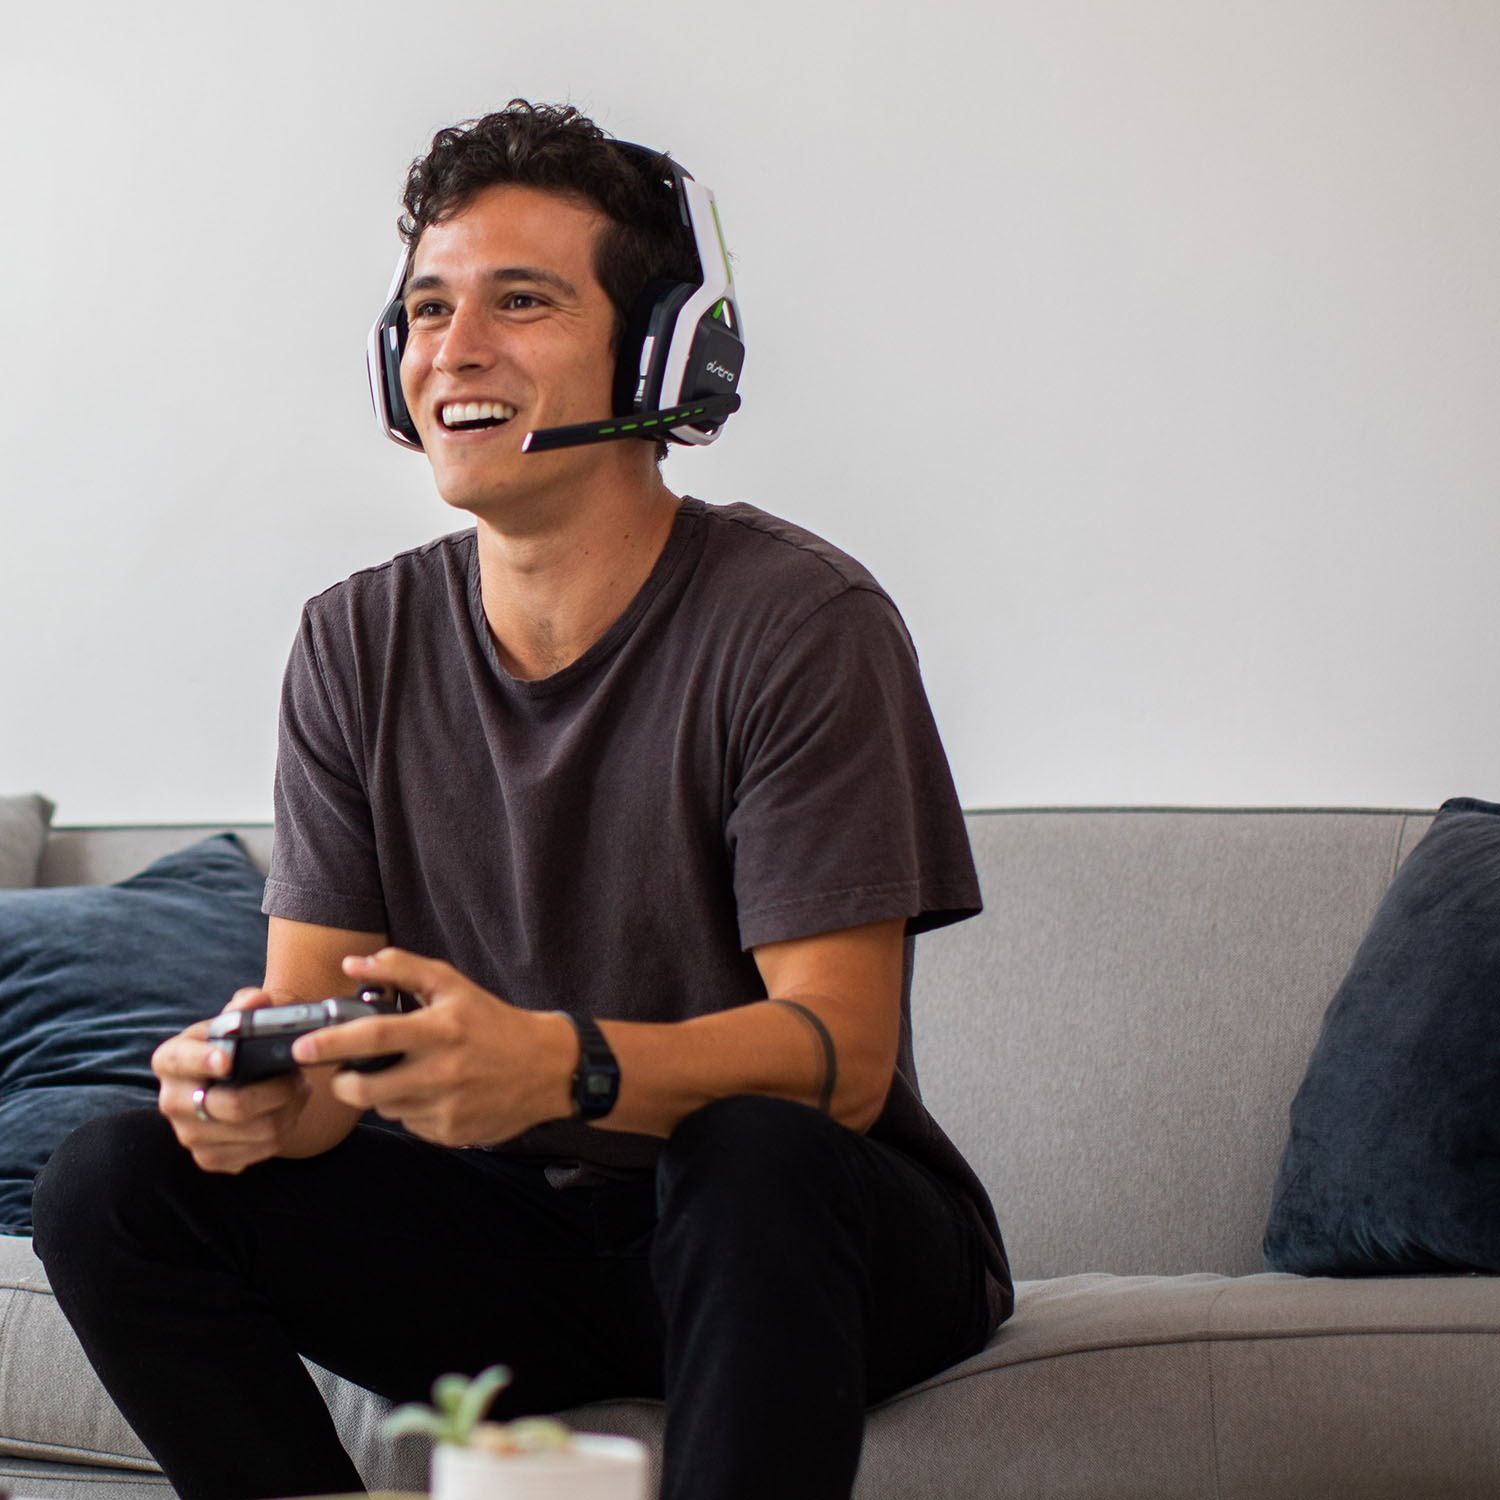 gaming headphones for xbox one s